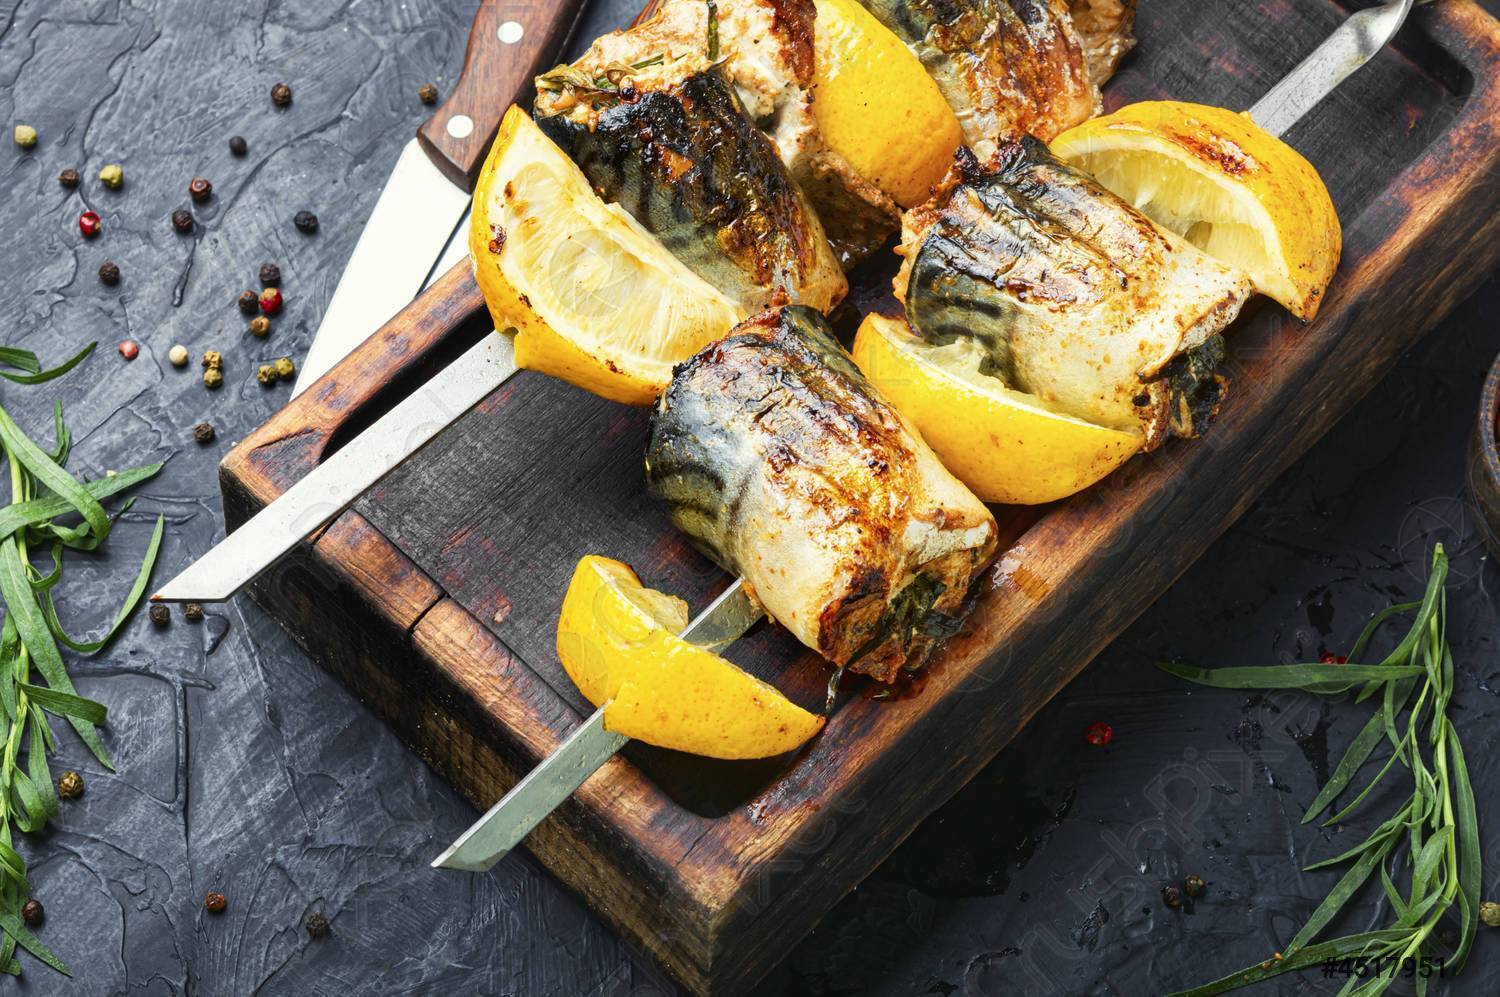 Mackerel in the oven in a new way